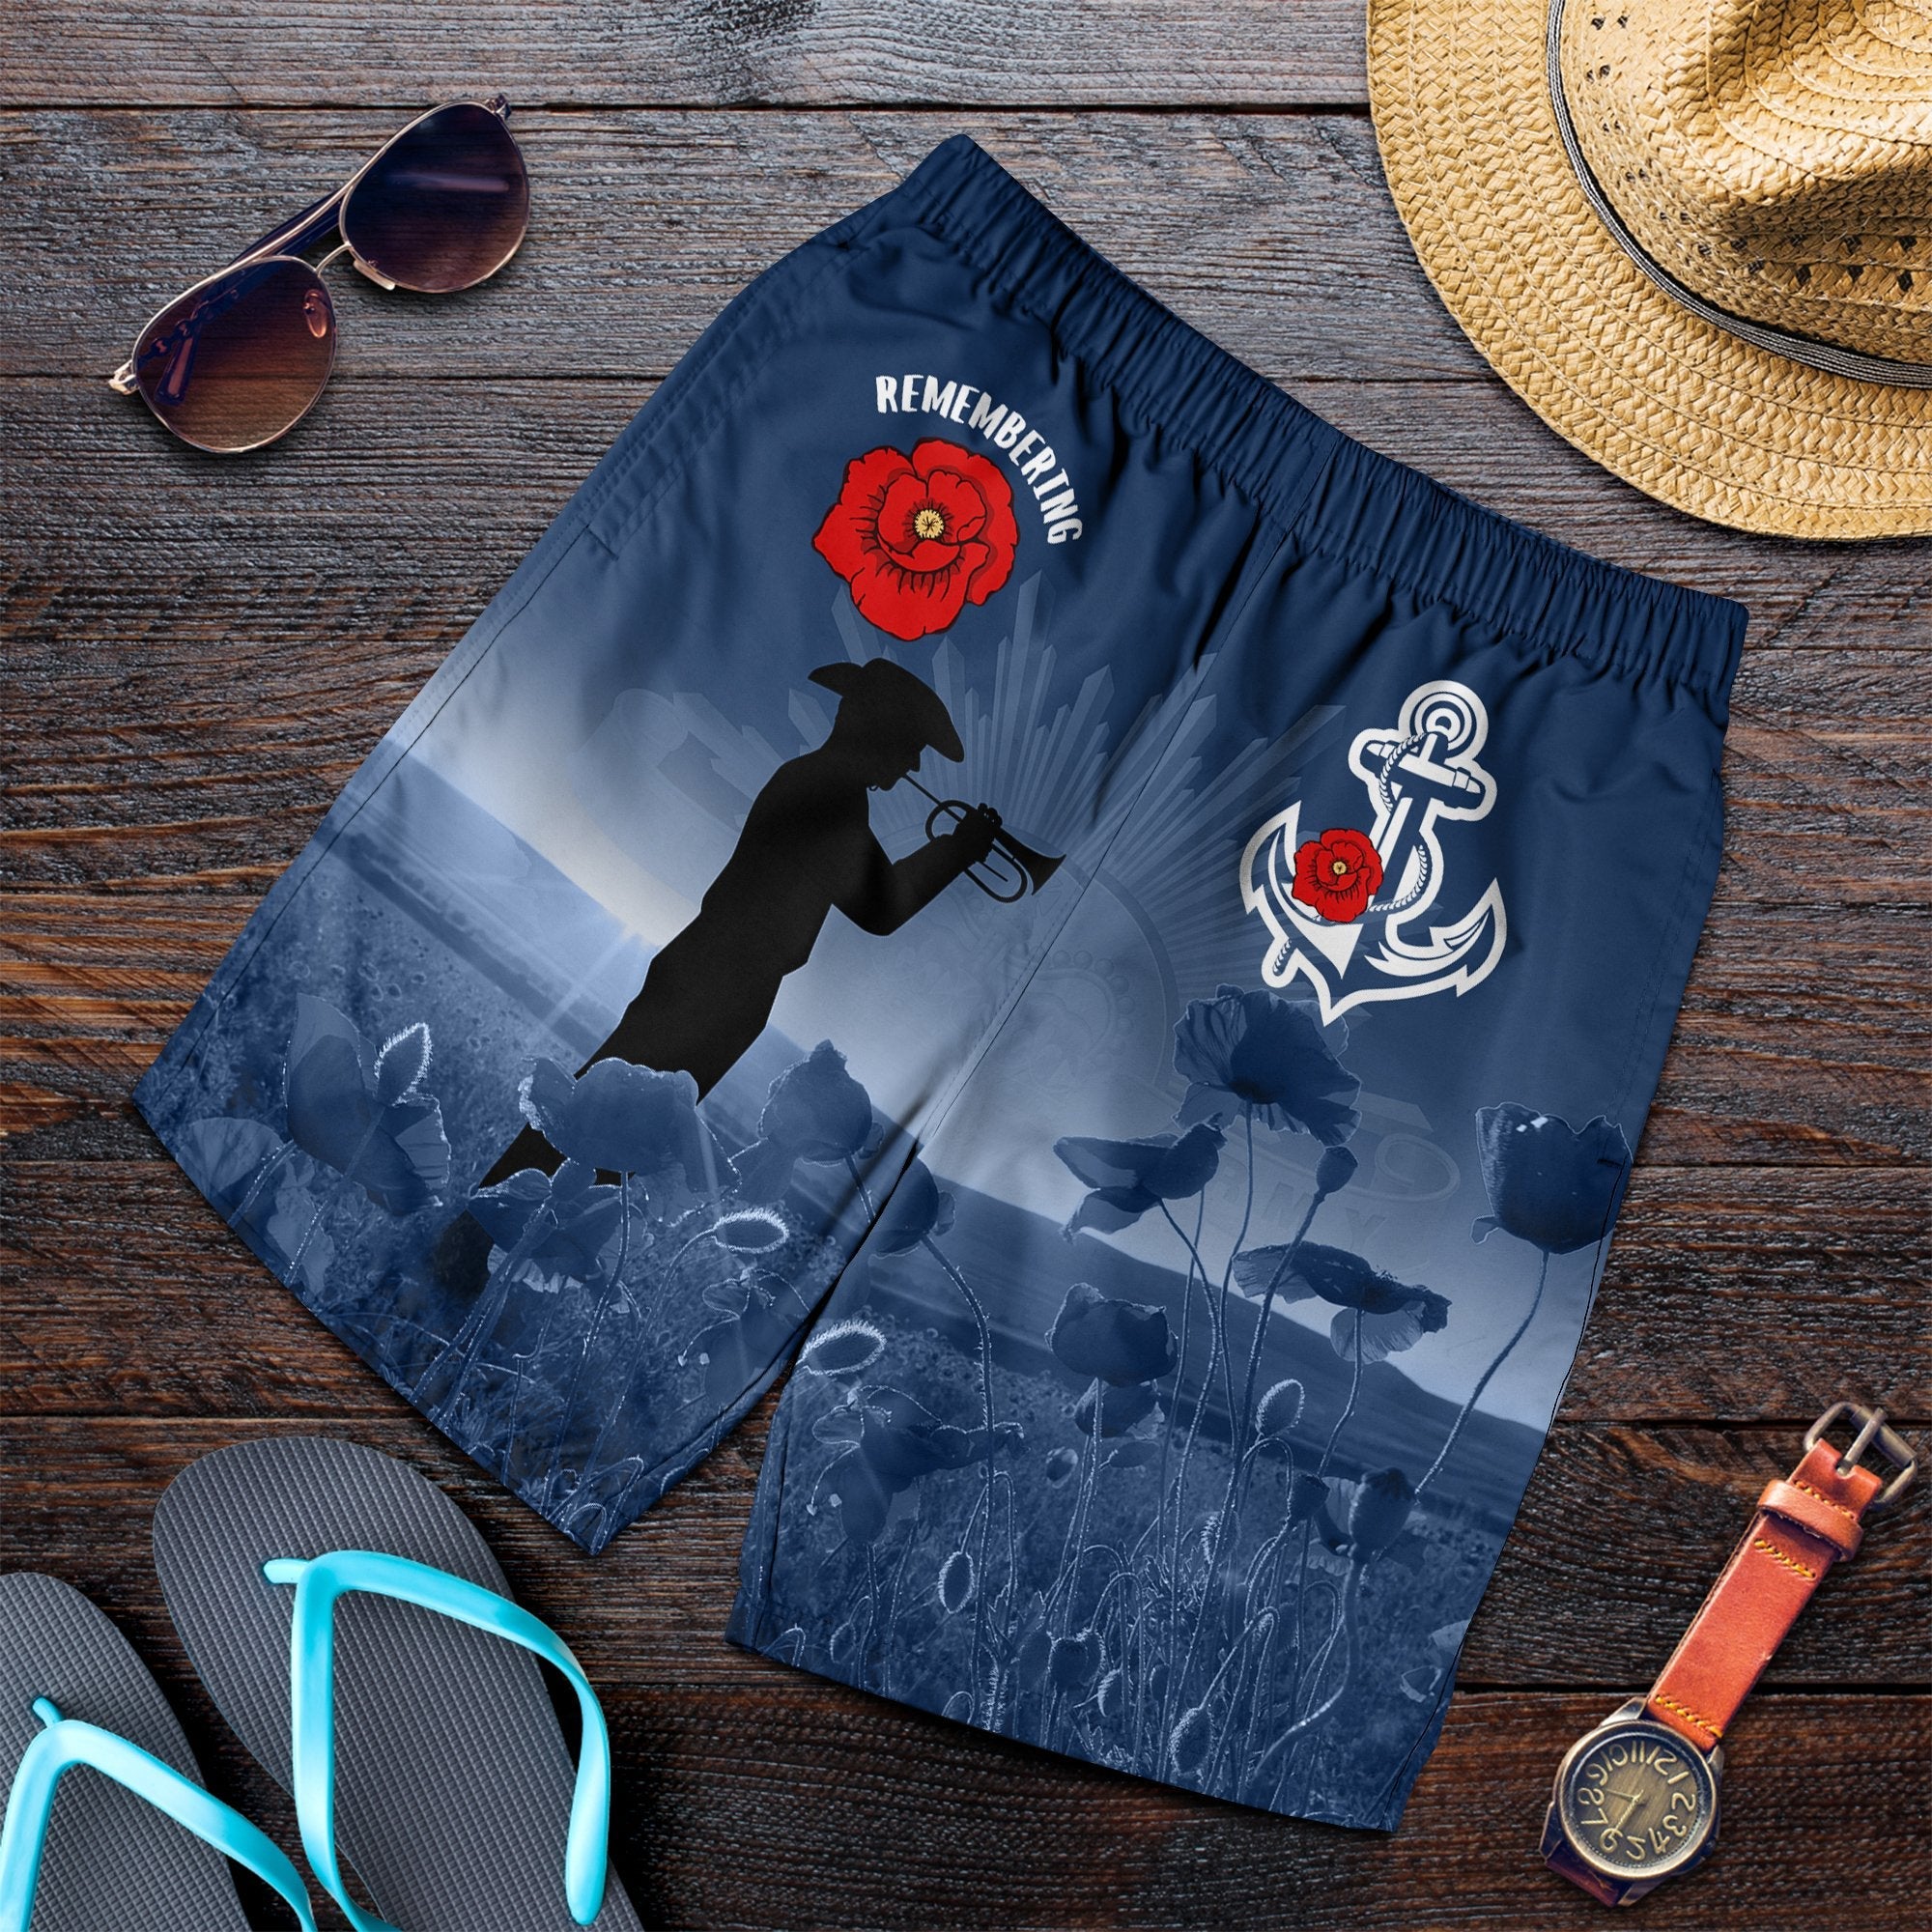 Australia Navy Anzac Men's Shorts- Remembering Our Heroes